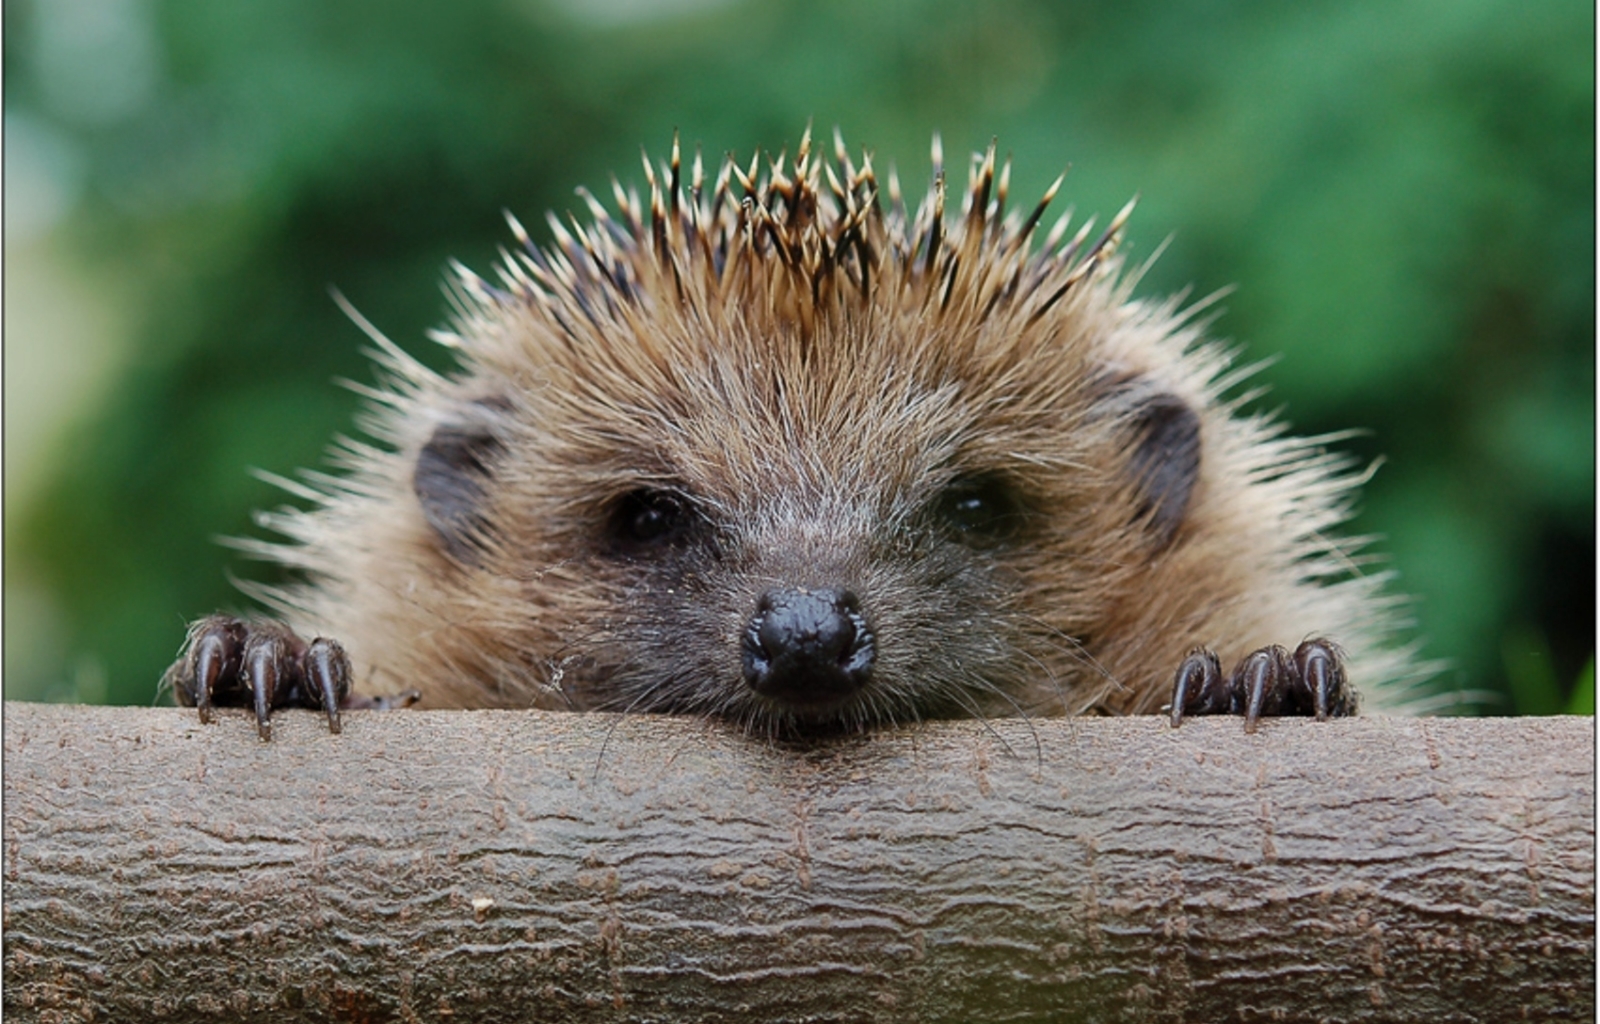 46299 download wallpaper animals, hedgehogs screensavers and pictures for free